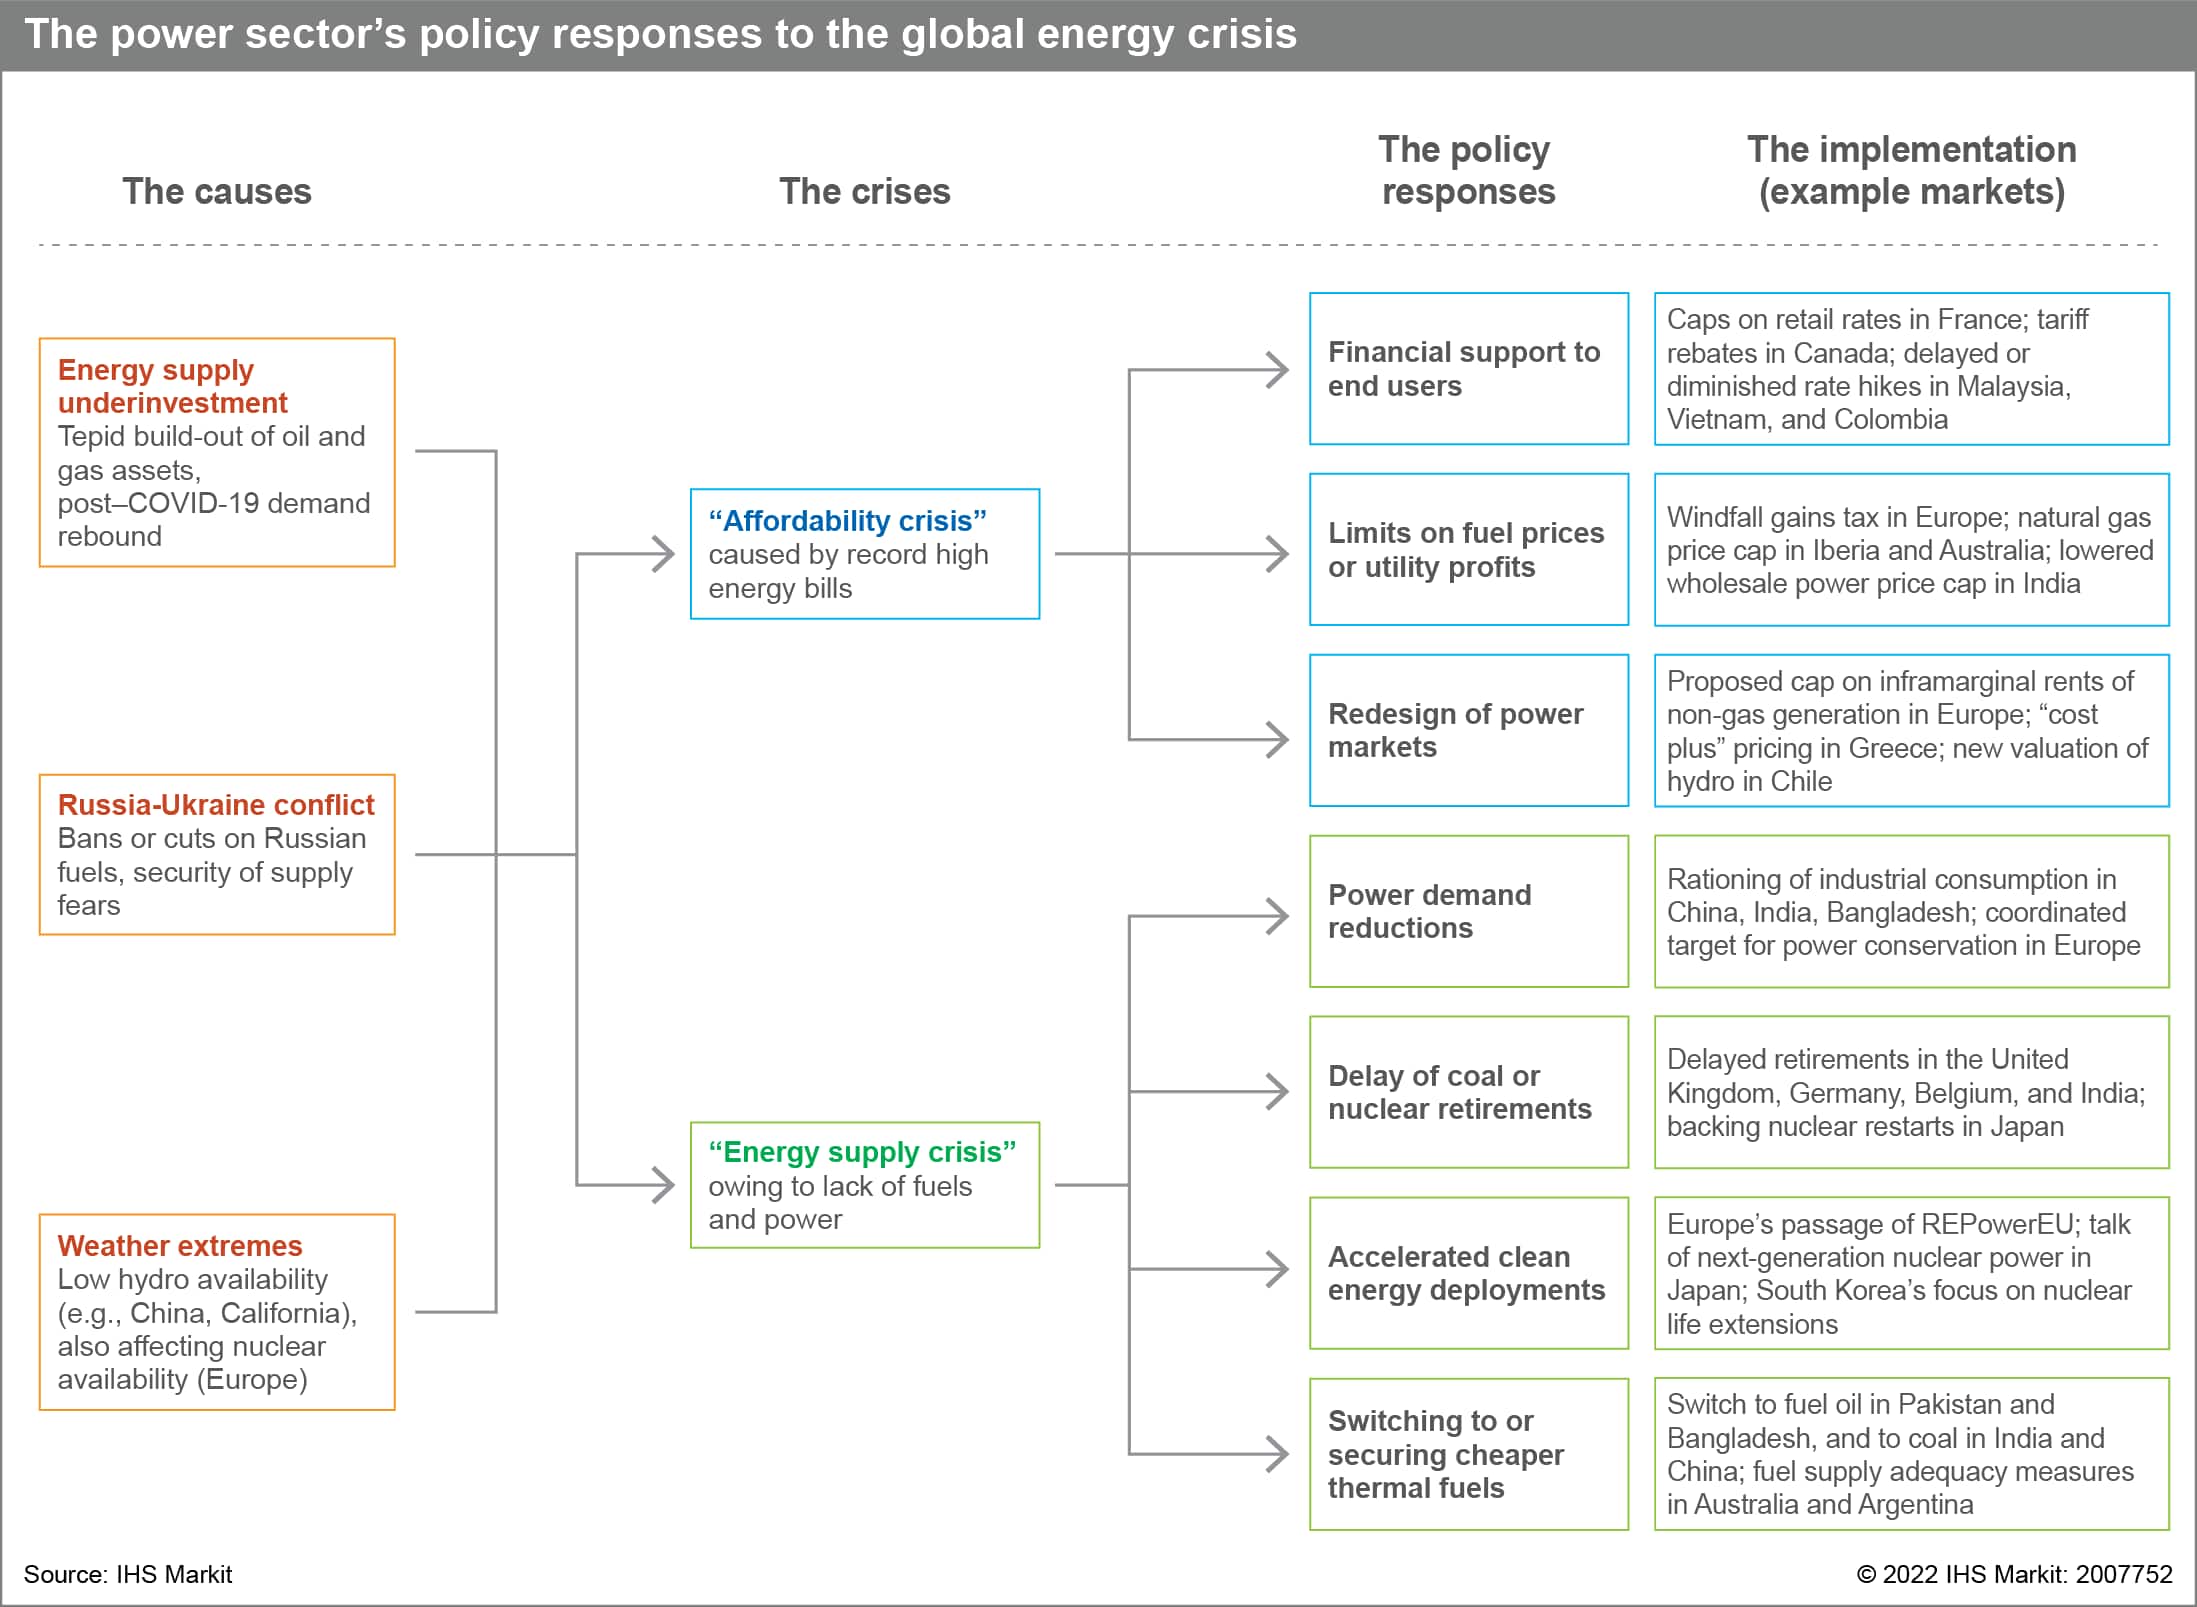 The power sector's policy responses to the global energy crisis